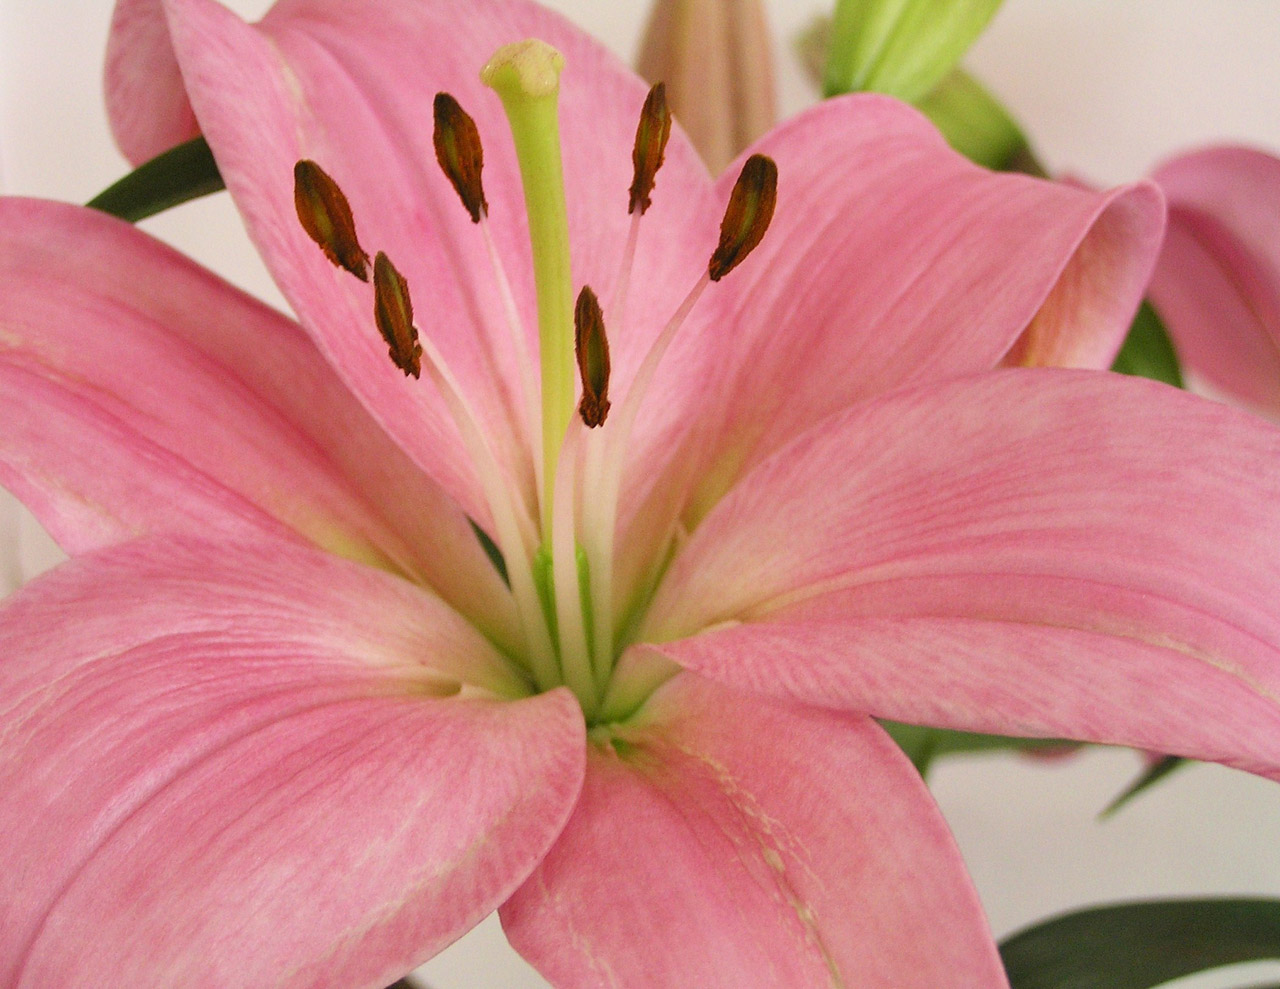 Download Lily Pink Flower Free Photo.